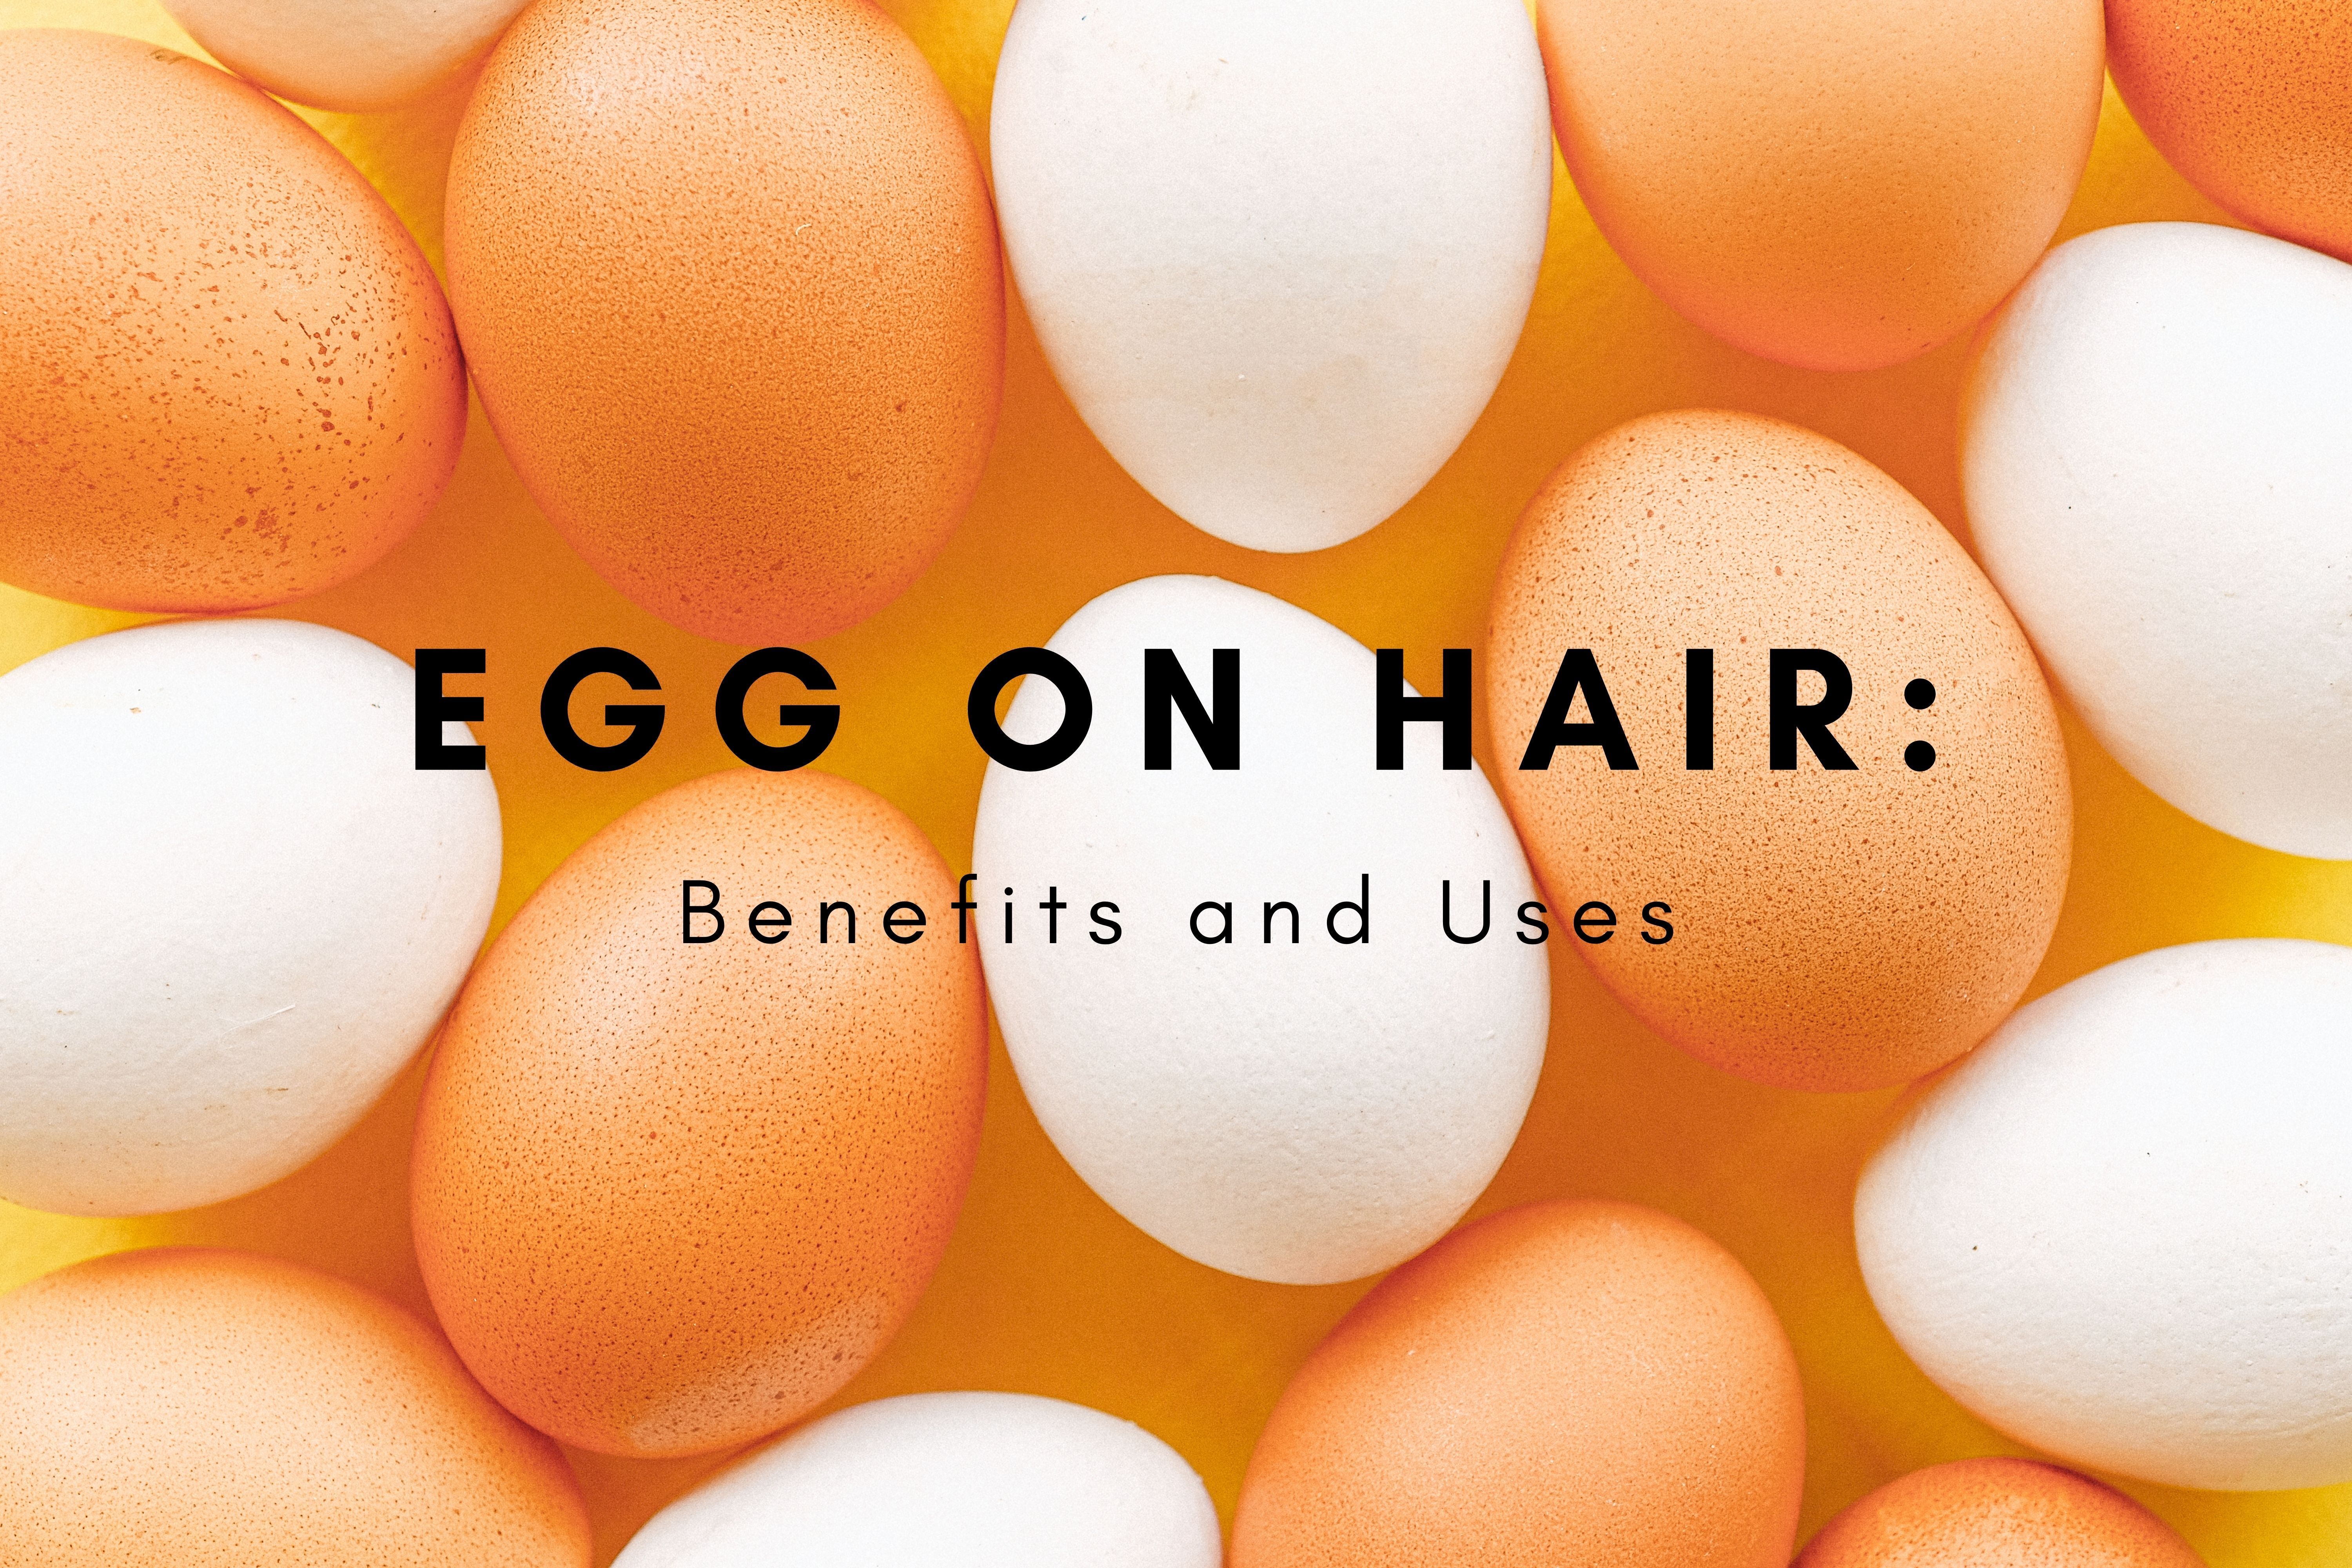 Egg on Hair: Benefits and Uses